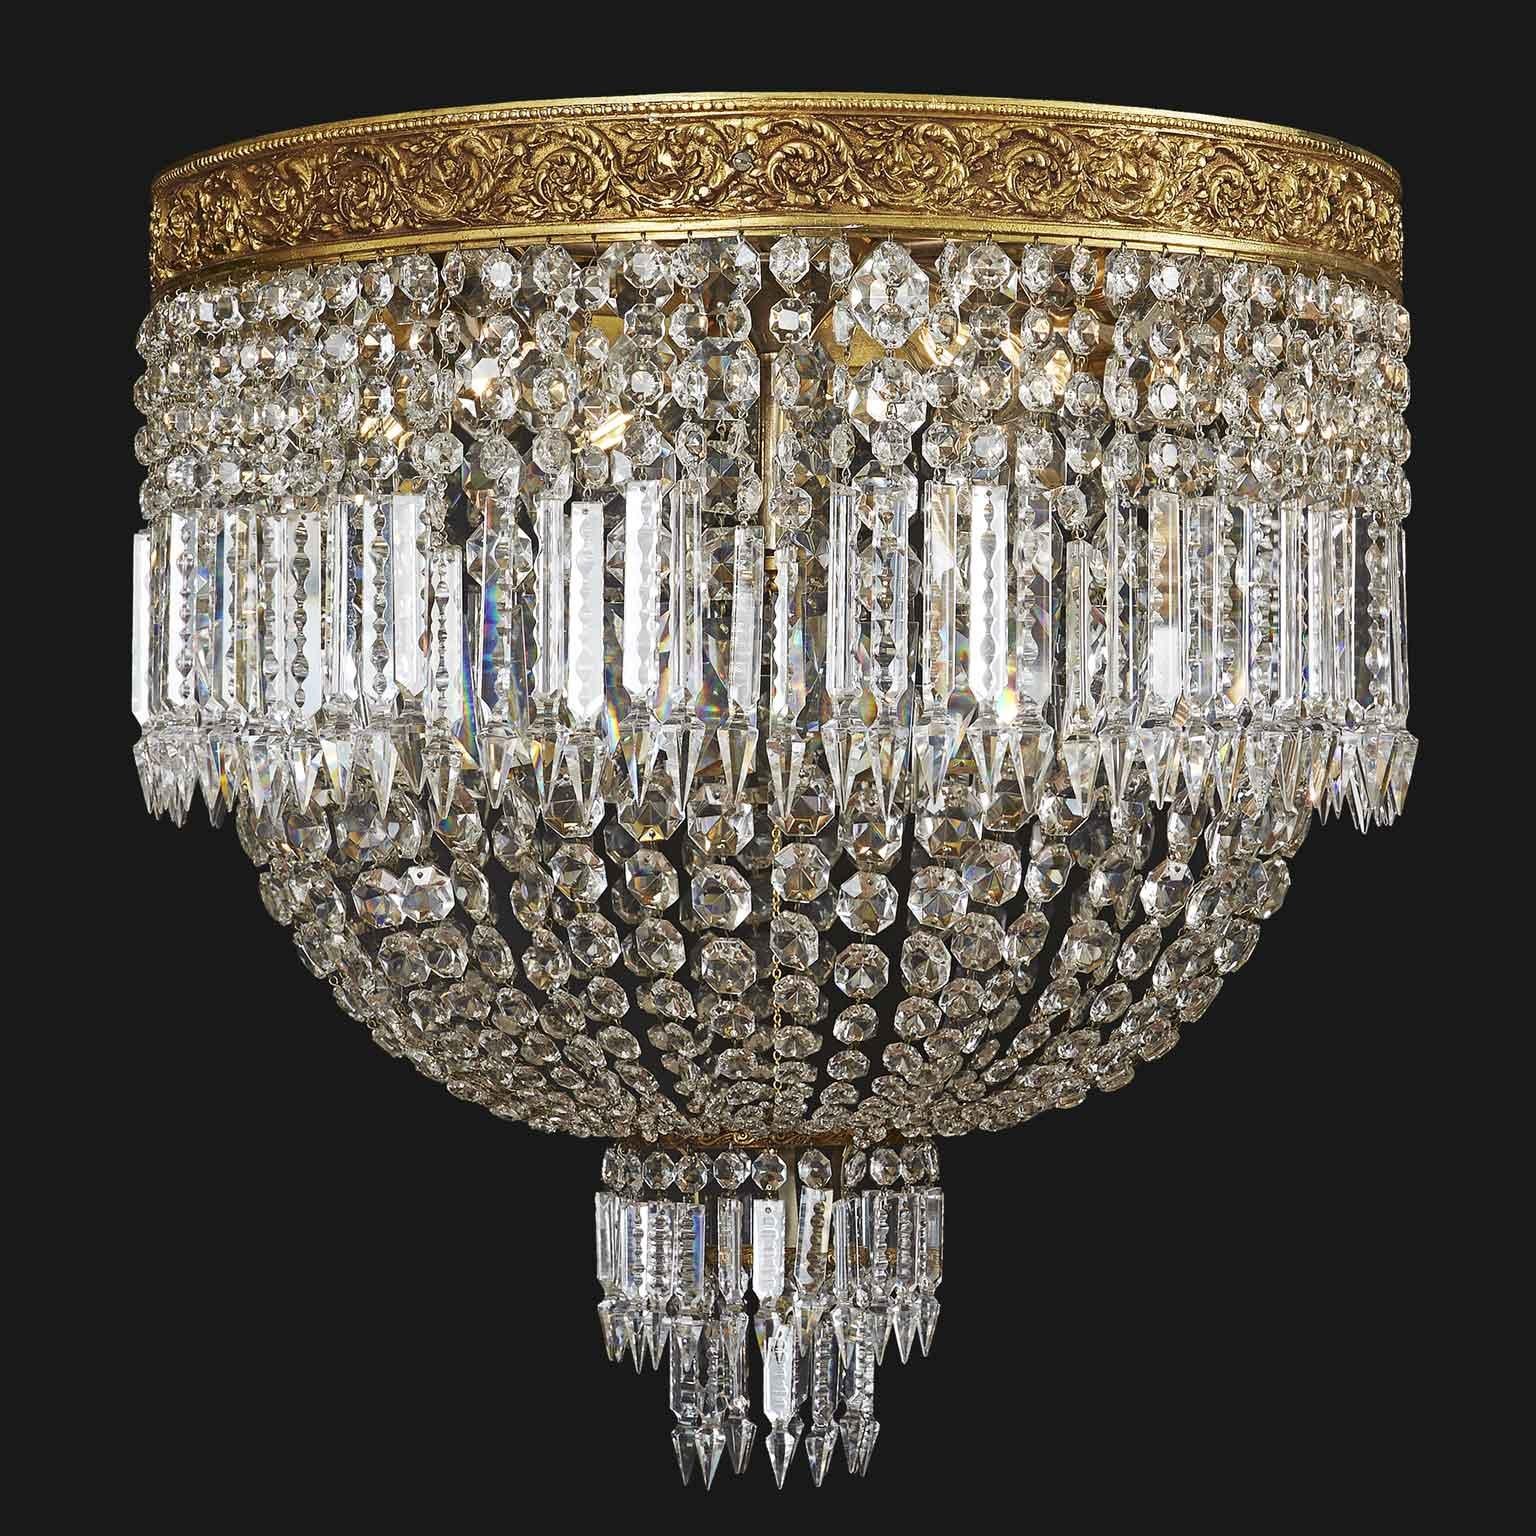 Faceted Large Italian Crystal Ceiling Fixture Round Flush Mount circa 1955